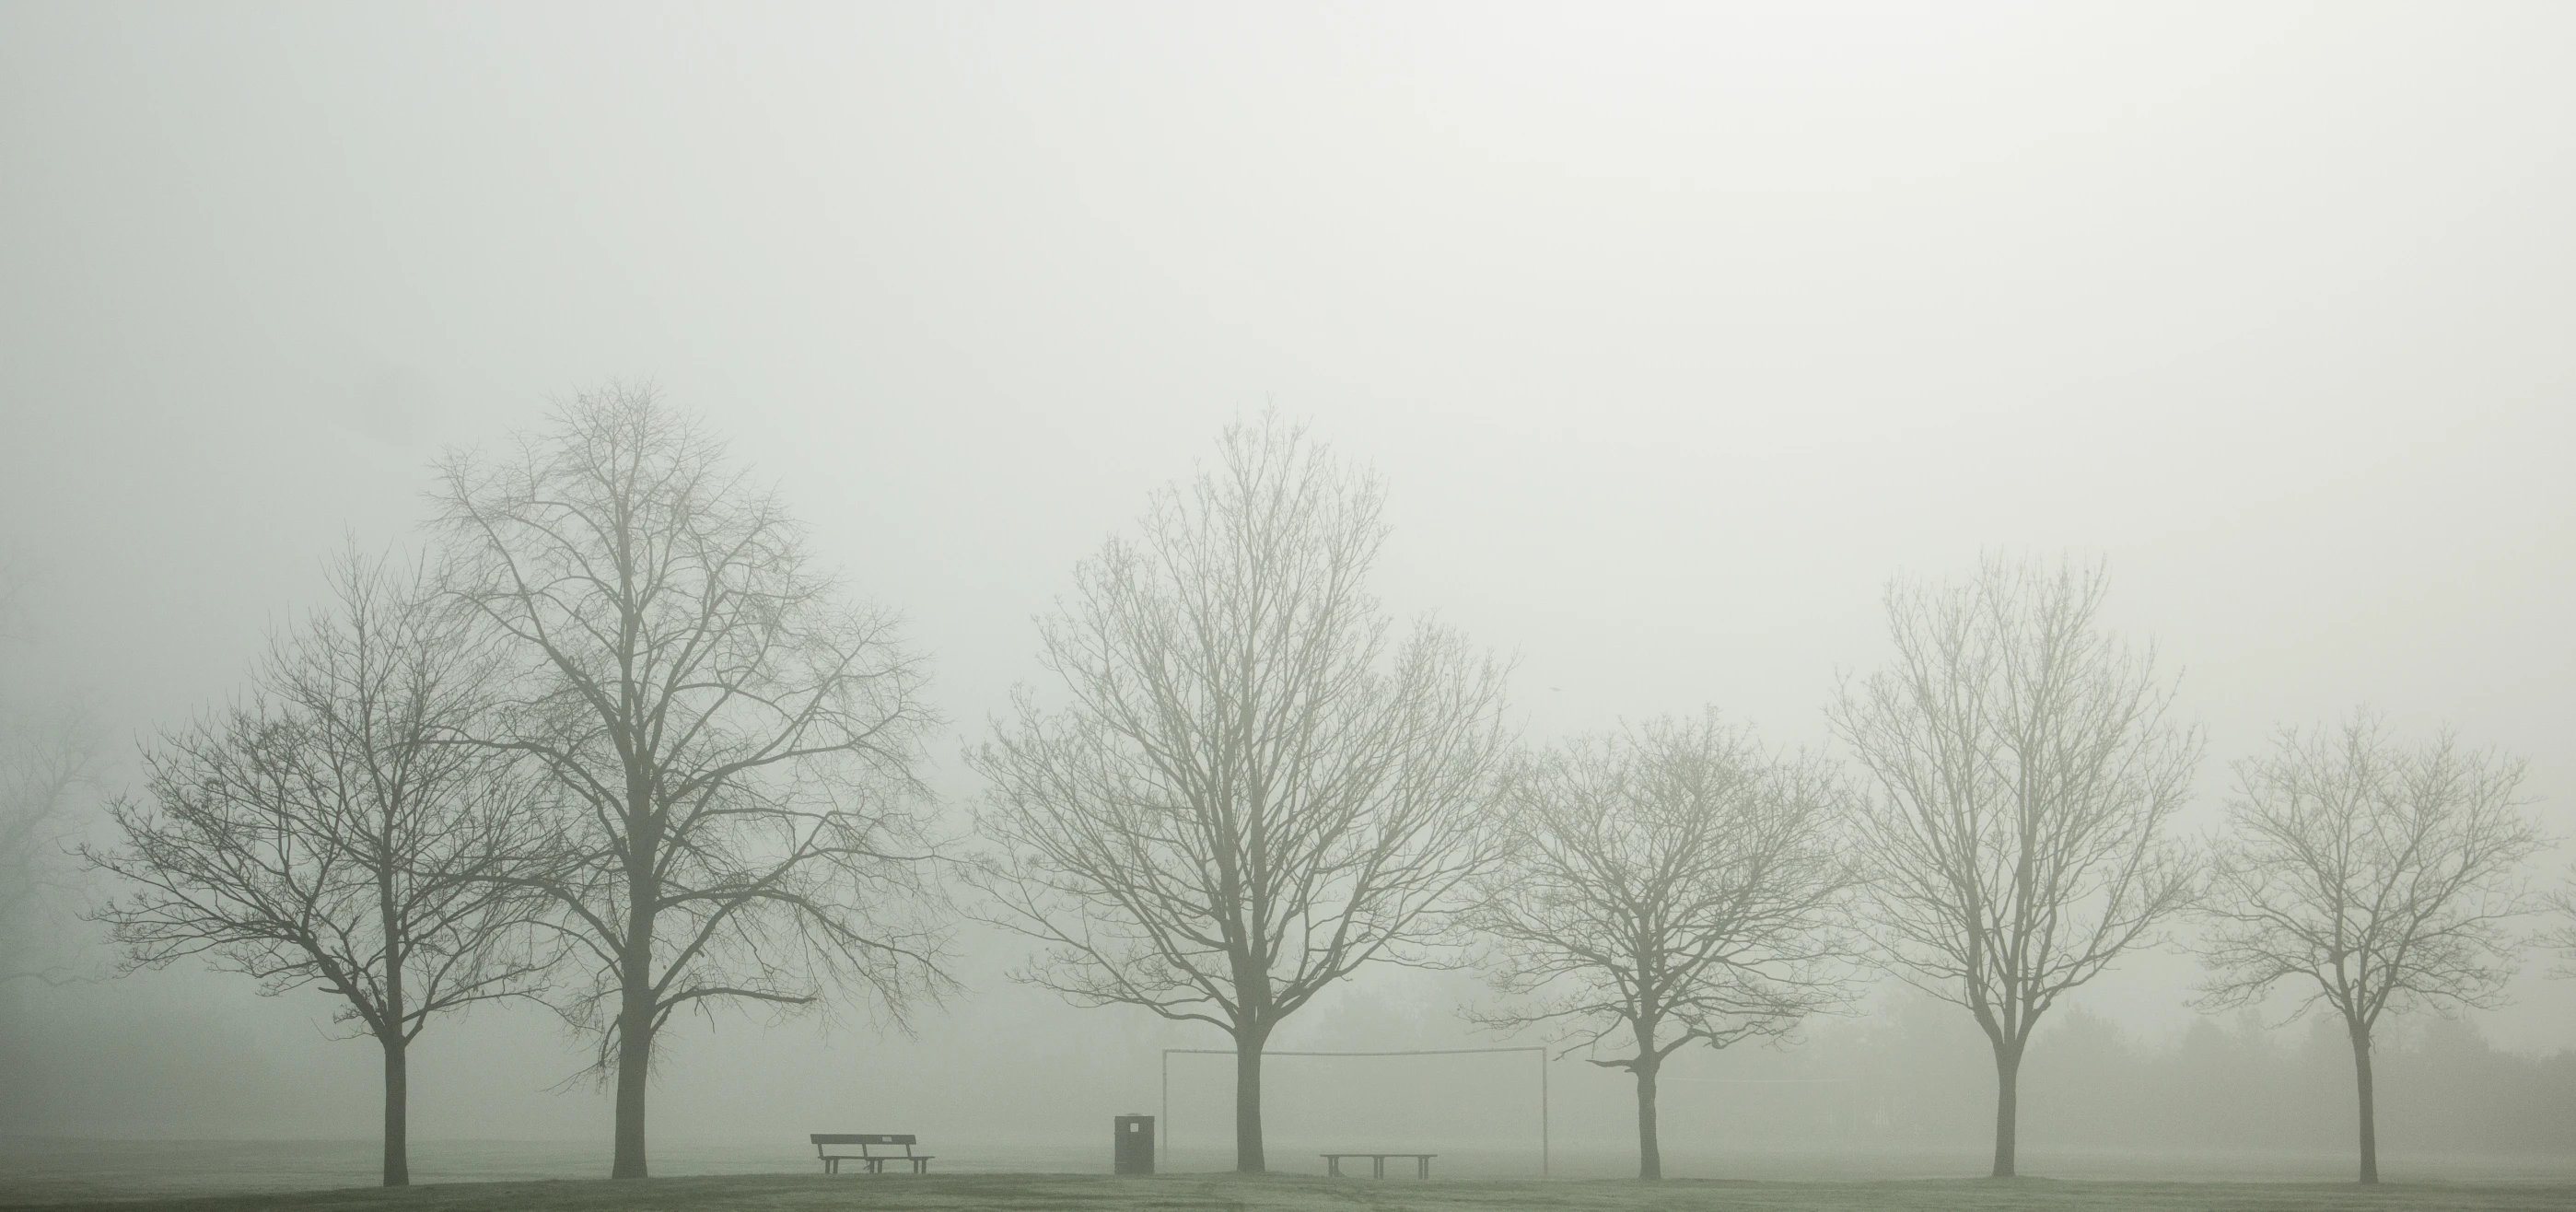 a park bench on a foggy day with trees in the background